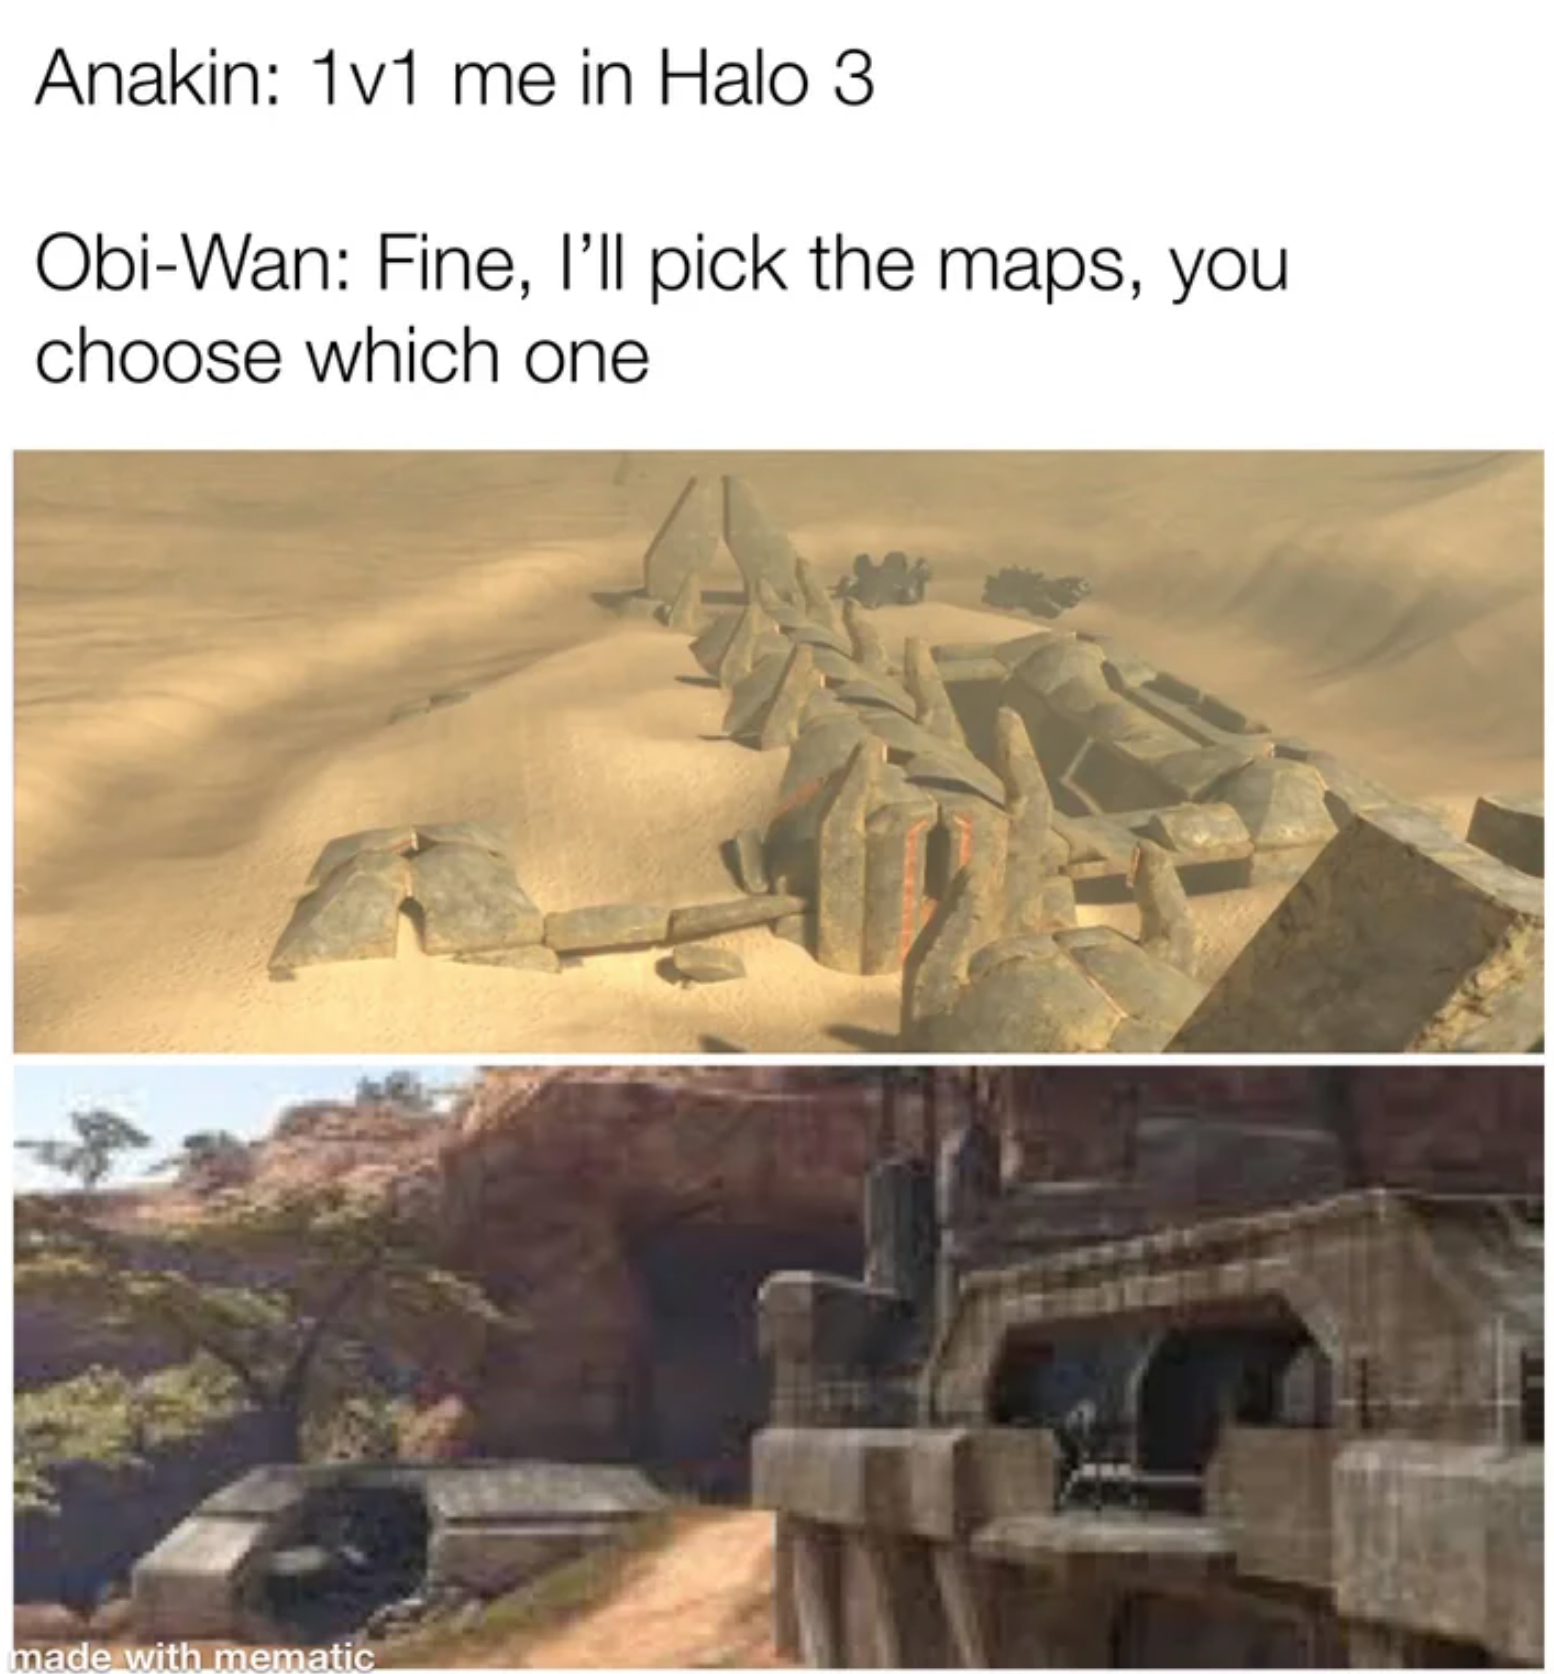 funny gaming memes - archaeological site - Anakin 1v1 me in Halo 3 3 ObiWan Fine, I'll pick the maps, you choose which one made with mematic